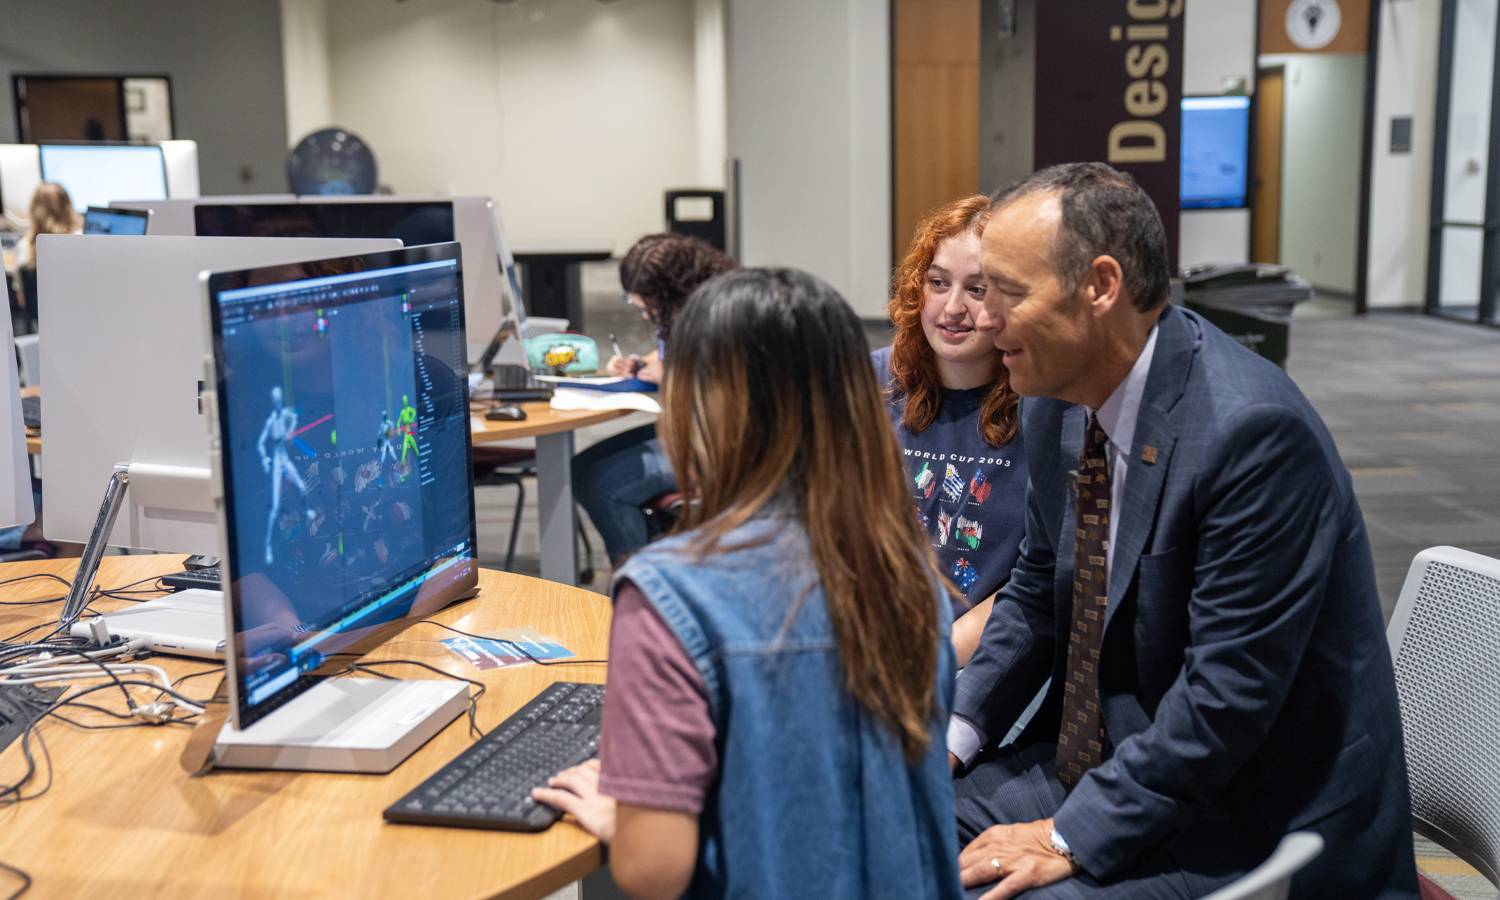 President Damphousse and students explore 3D imagery on specialized computers in Alkek One